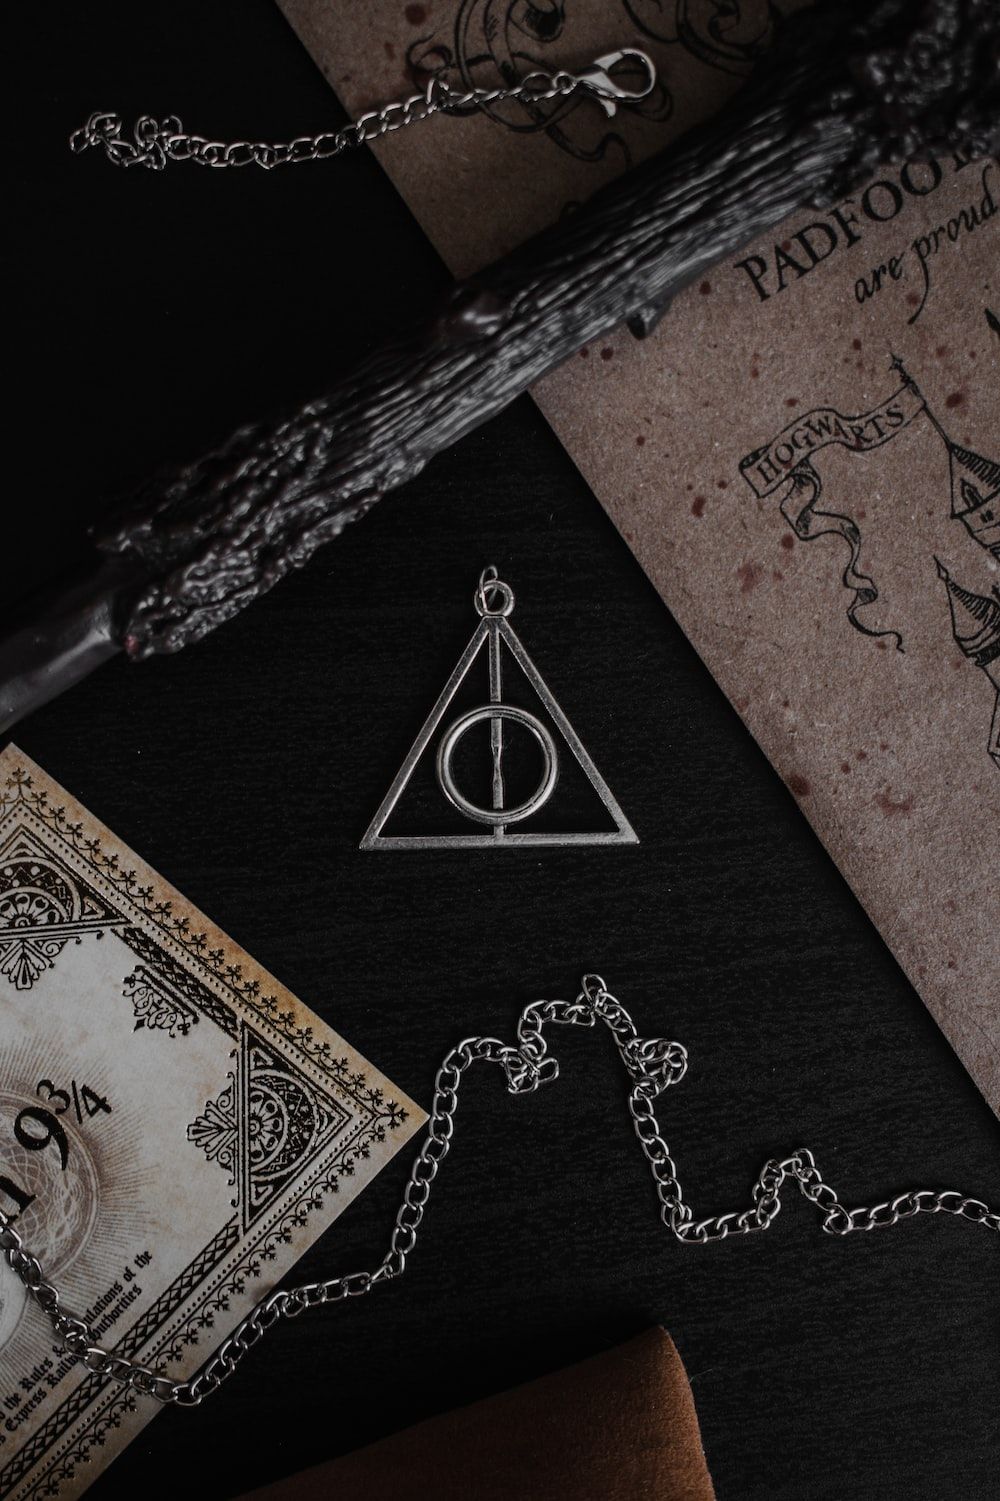 A Deathly Hallows necklace on a black background with a wand and a book. - Hogwarts